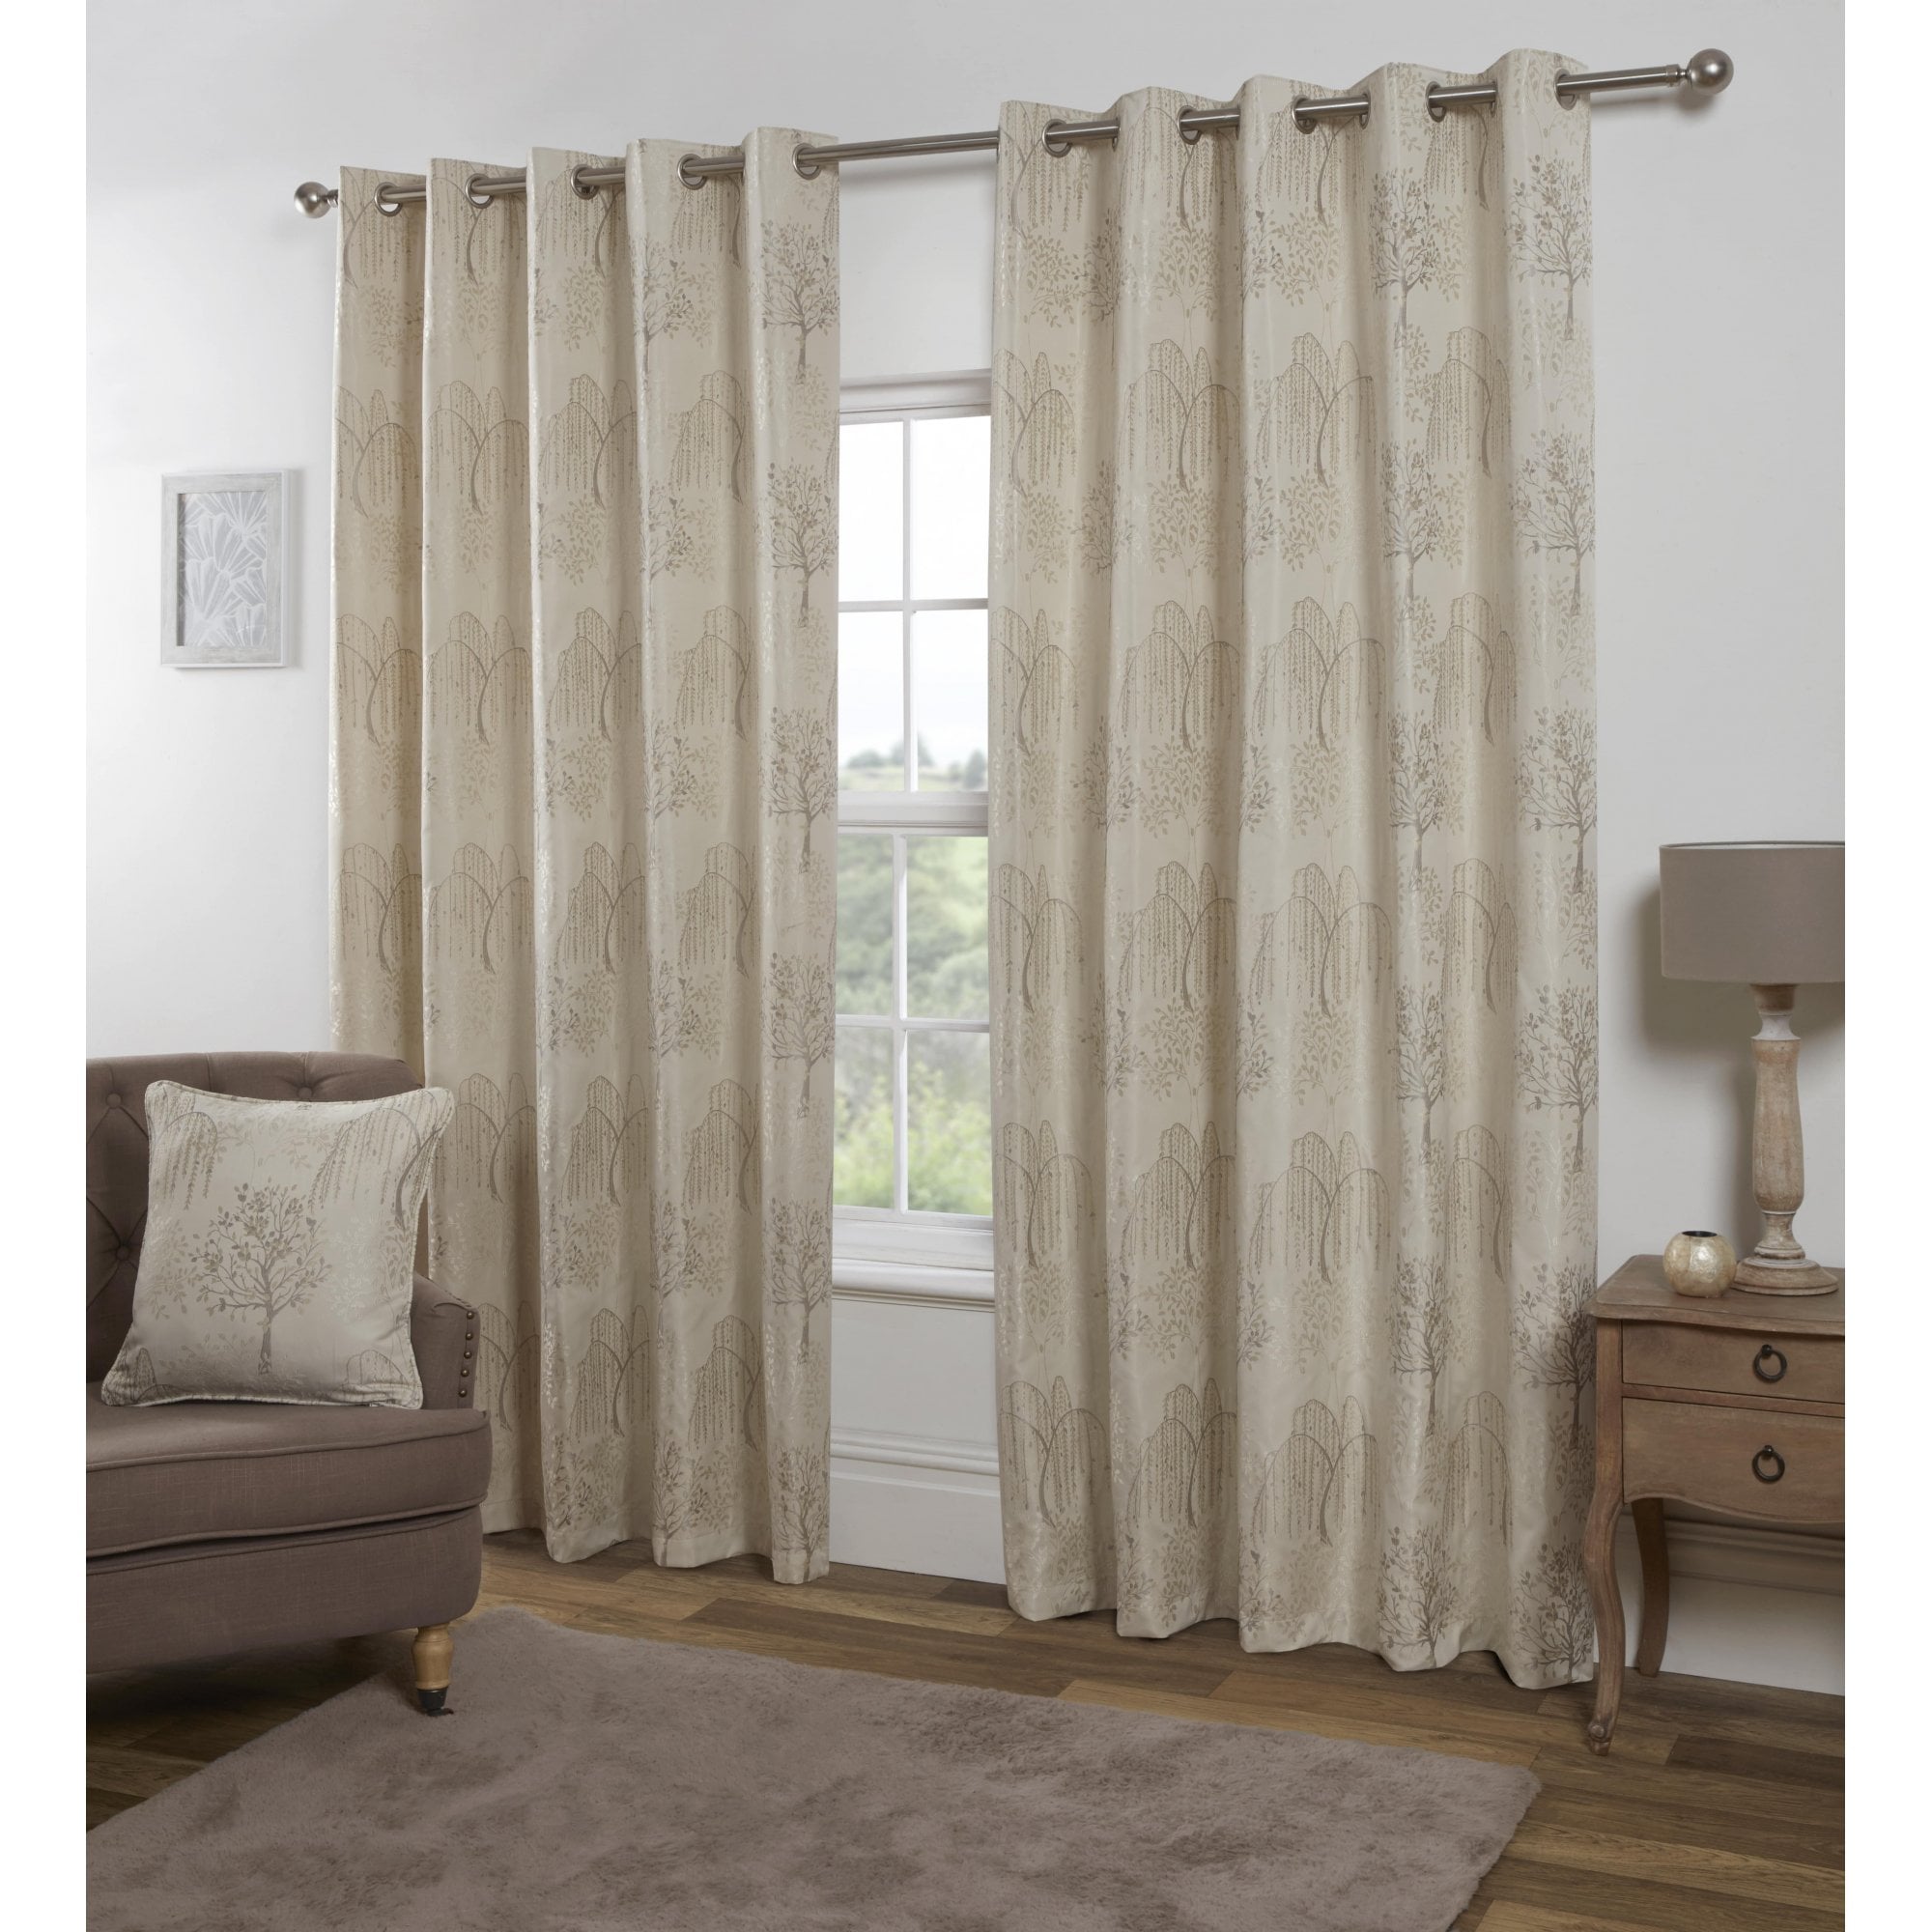 Orchard Patterned Eyelet Curtains - Ivory - 117cm (46") X 137cm (54") - Lewis’s  | TJ Hughes Cream